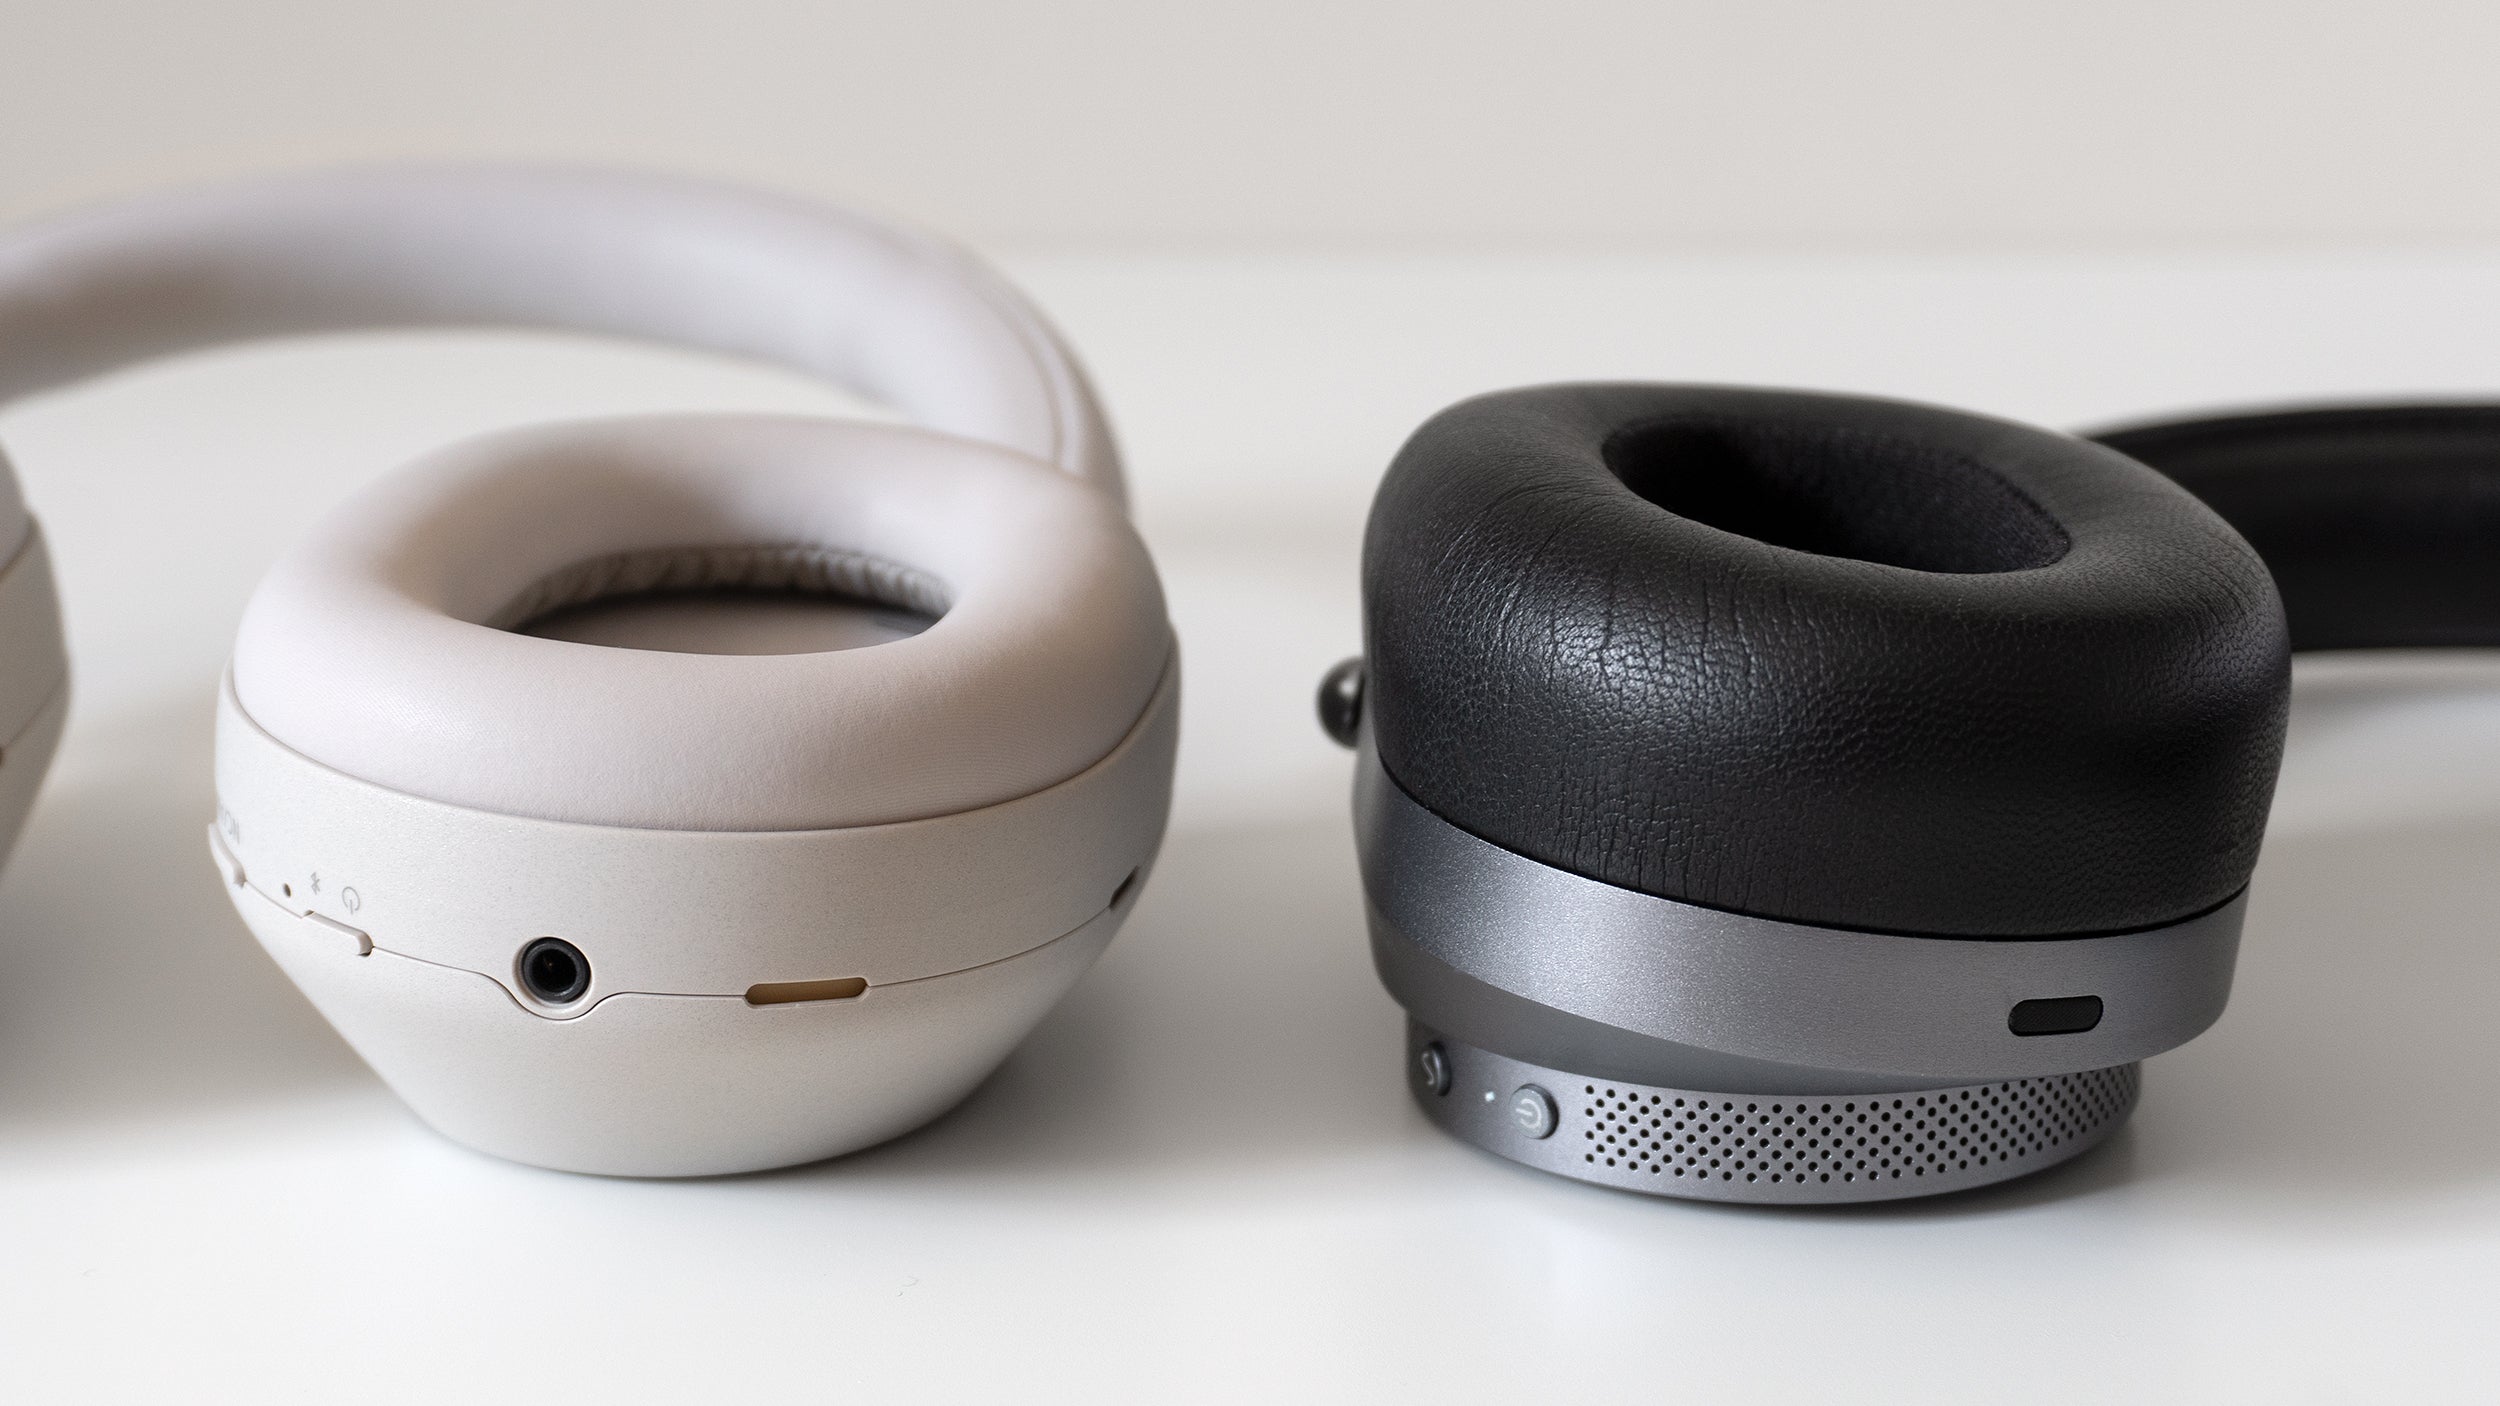 The Master & Dynamic MW75's lambskin-covered ear cup (right) offers thicker padding than the Sony WH-1000XM5s (left). (Photo: Andrew Liszewski | Gizmodo)